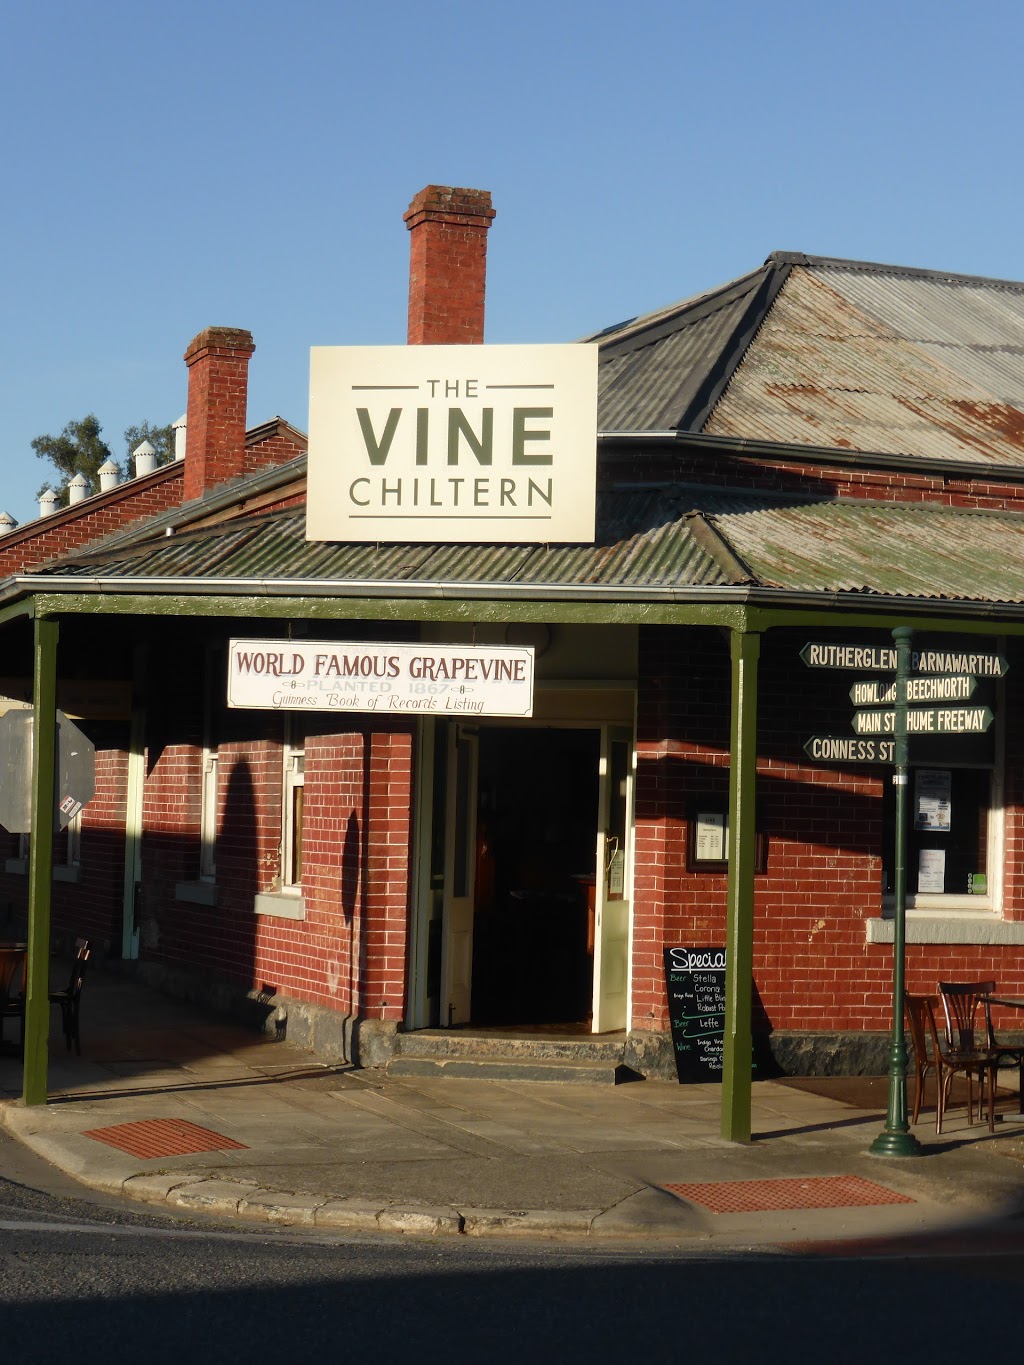 The Vine Chiltern | cafe | 53 Conness St, Chiltern VIC 3683, Australia | 0475044866 OR +61 475 044 866